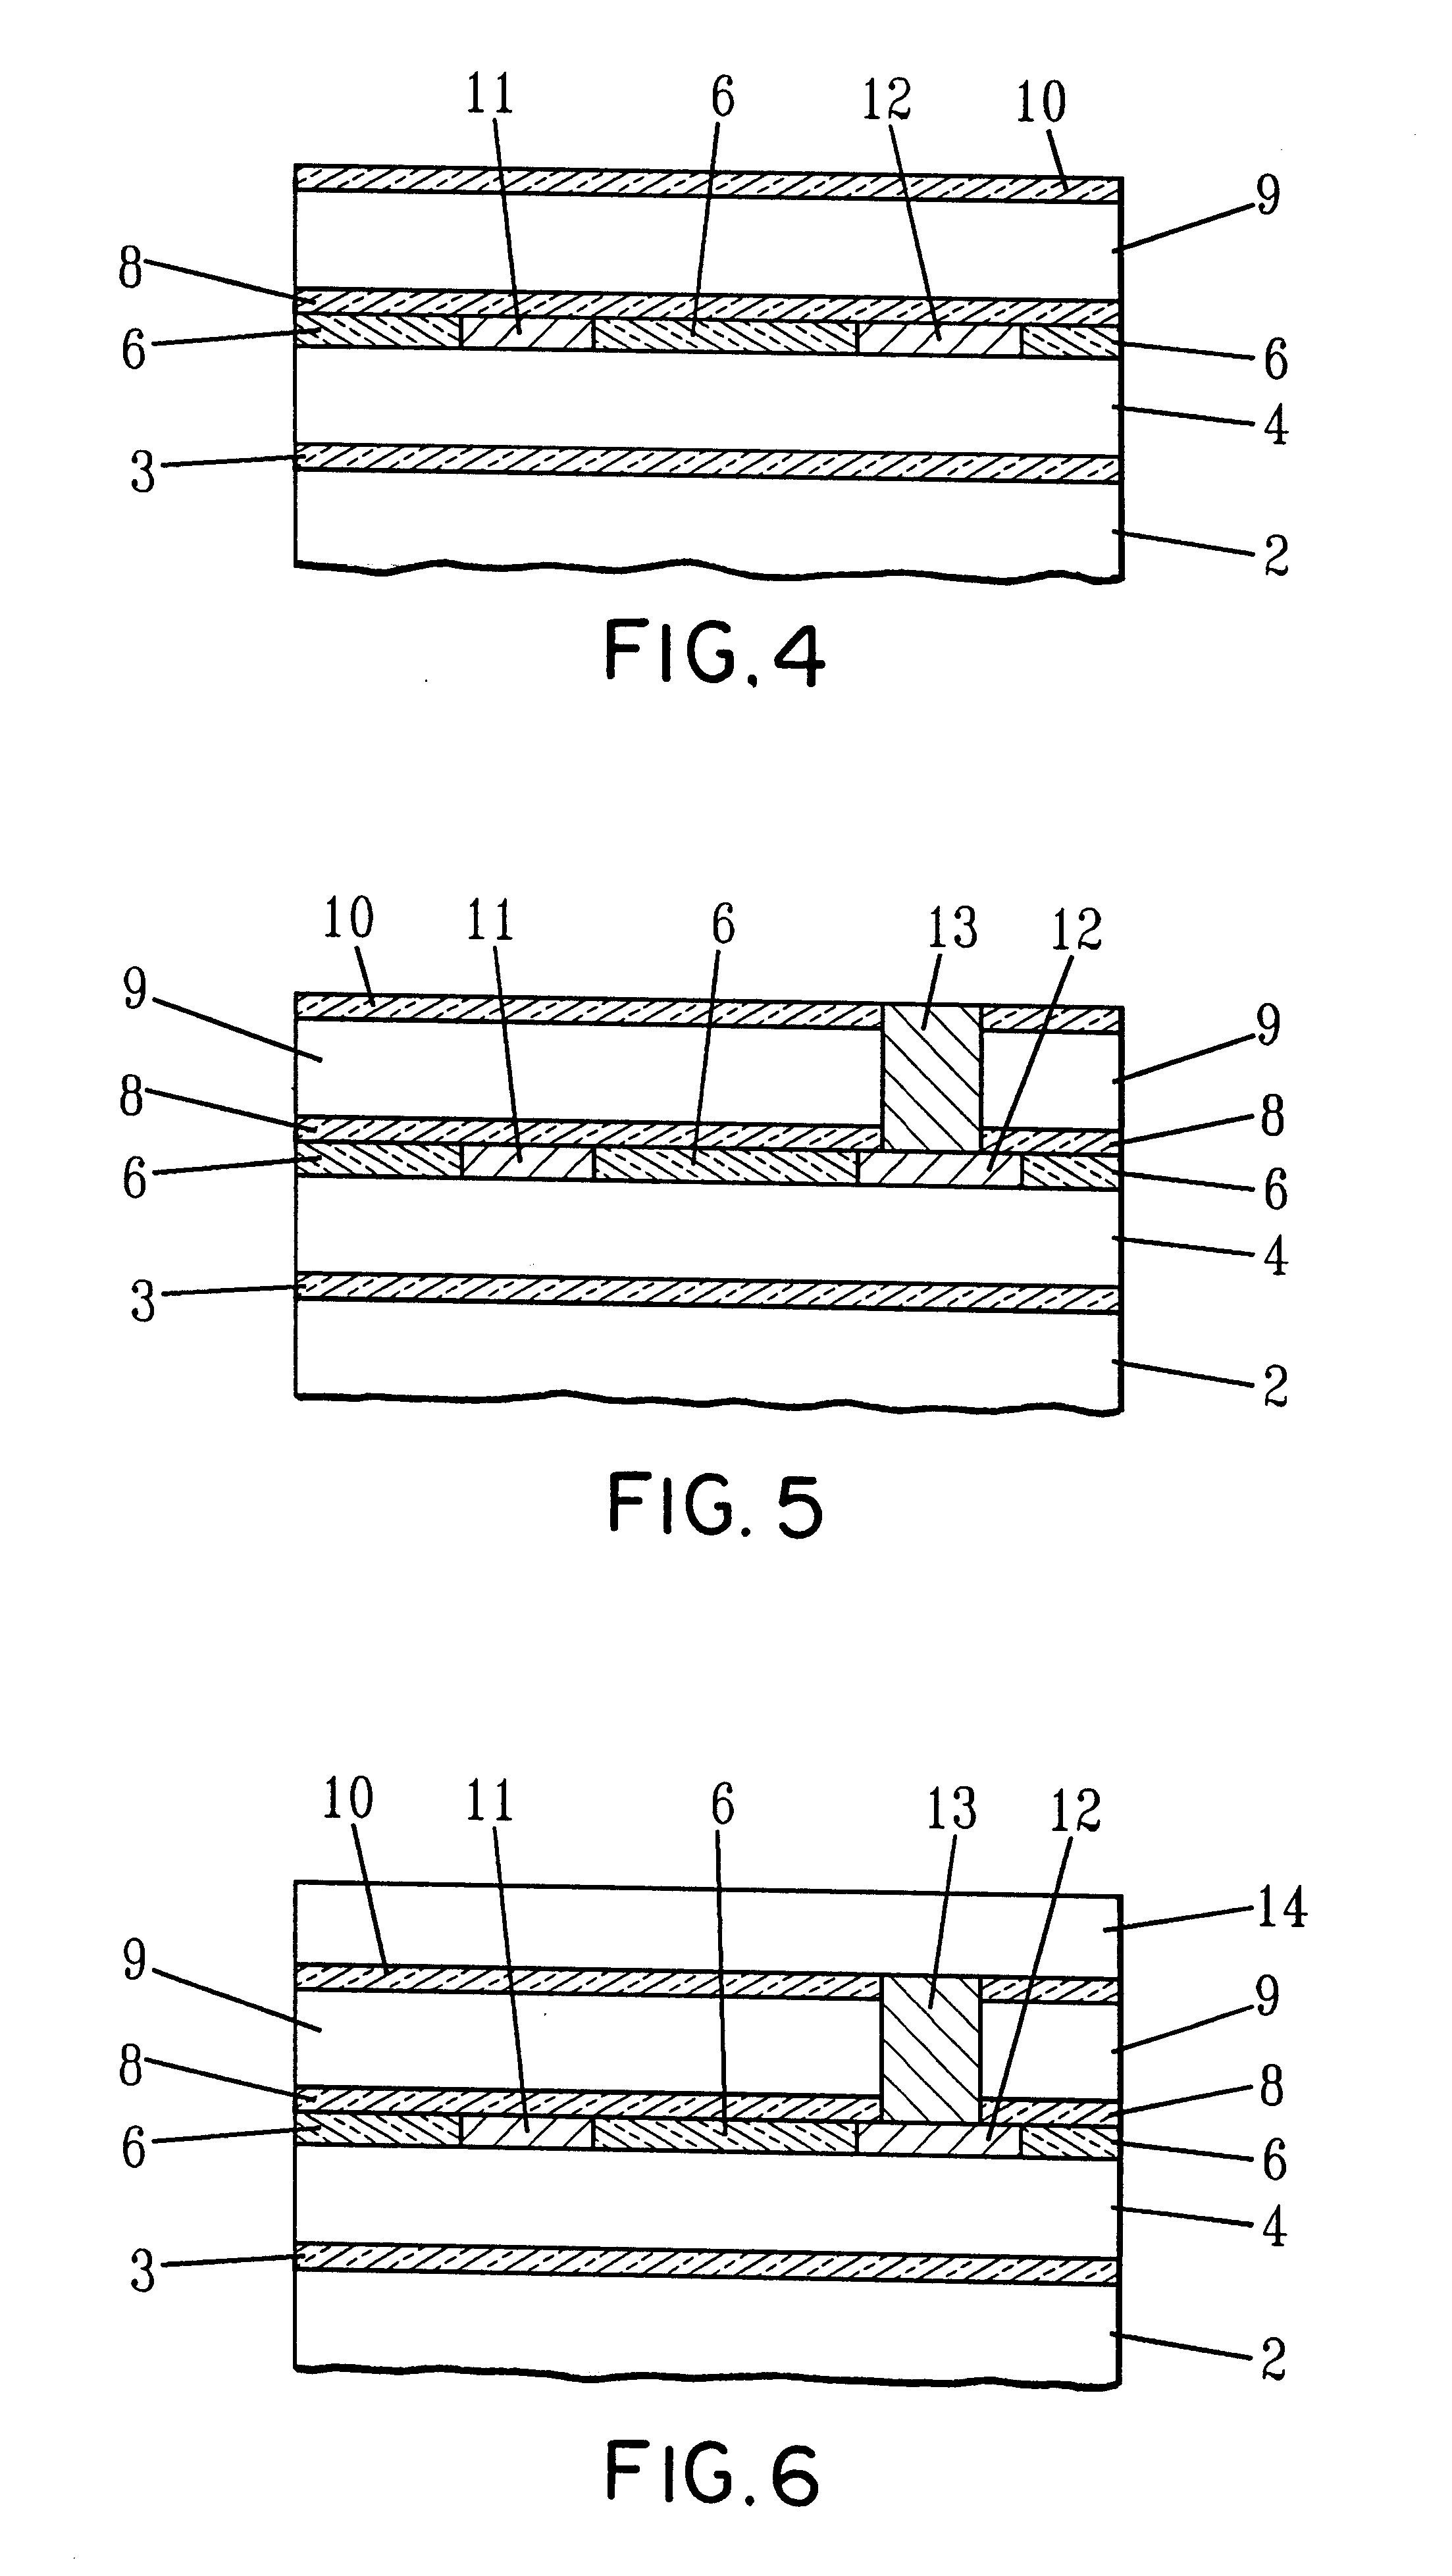 Multistack 3-dimensional high density semiconductor device and method for fabrication